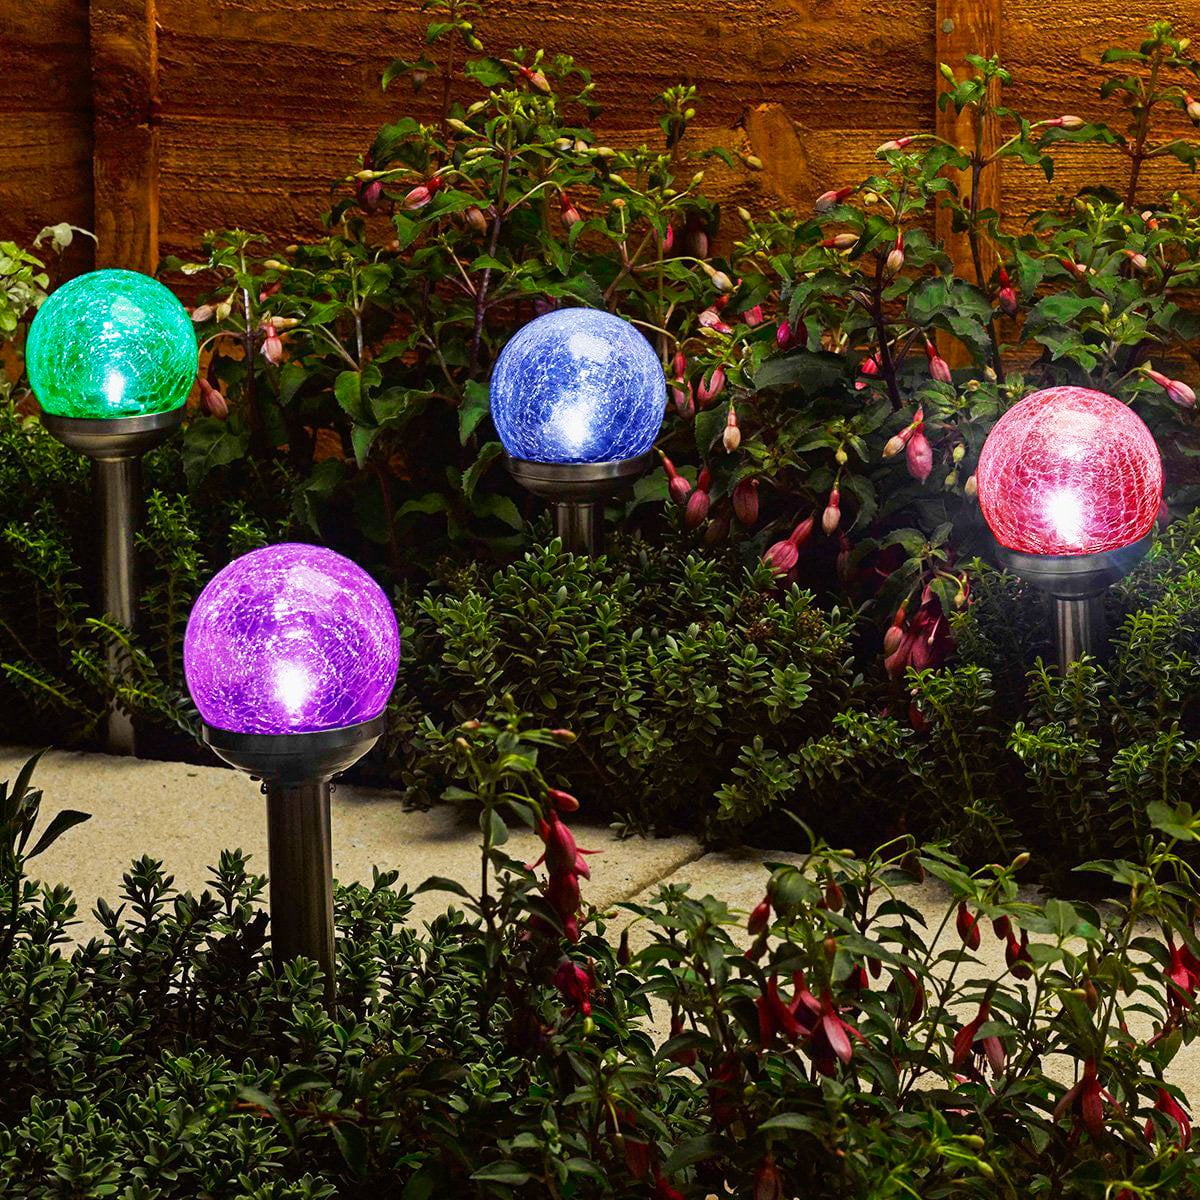 1 Pack AMWGIMI Solar Lights Pathway Outdoor Garden Colour Changing Globe Pathway Garden Stake Decor Lights Yard Art Waterproof LED Lights for Yard Patio Walkway Landscape Lawn Decorations